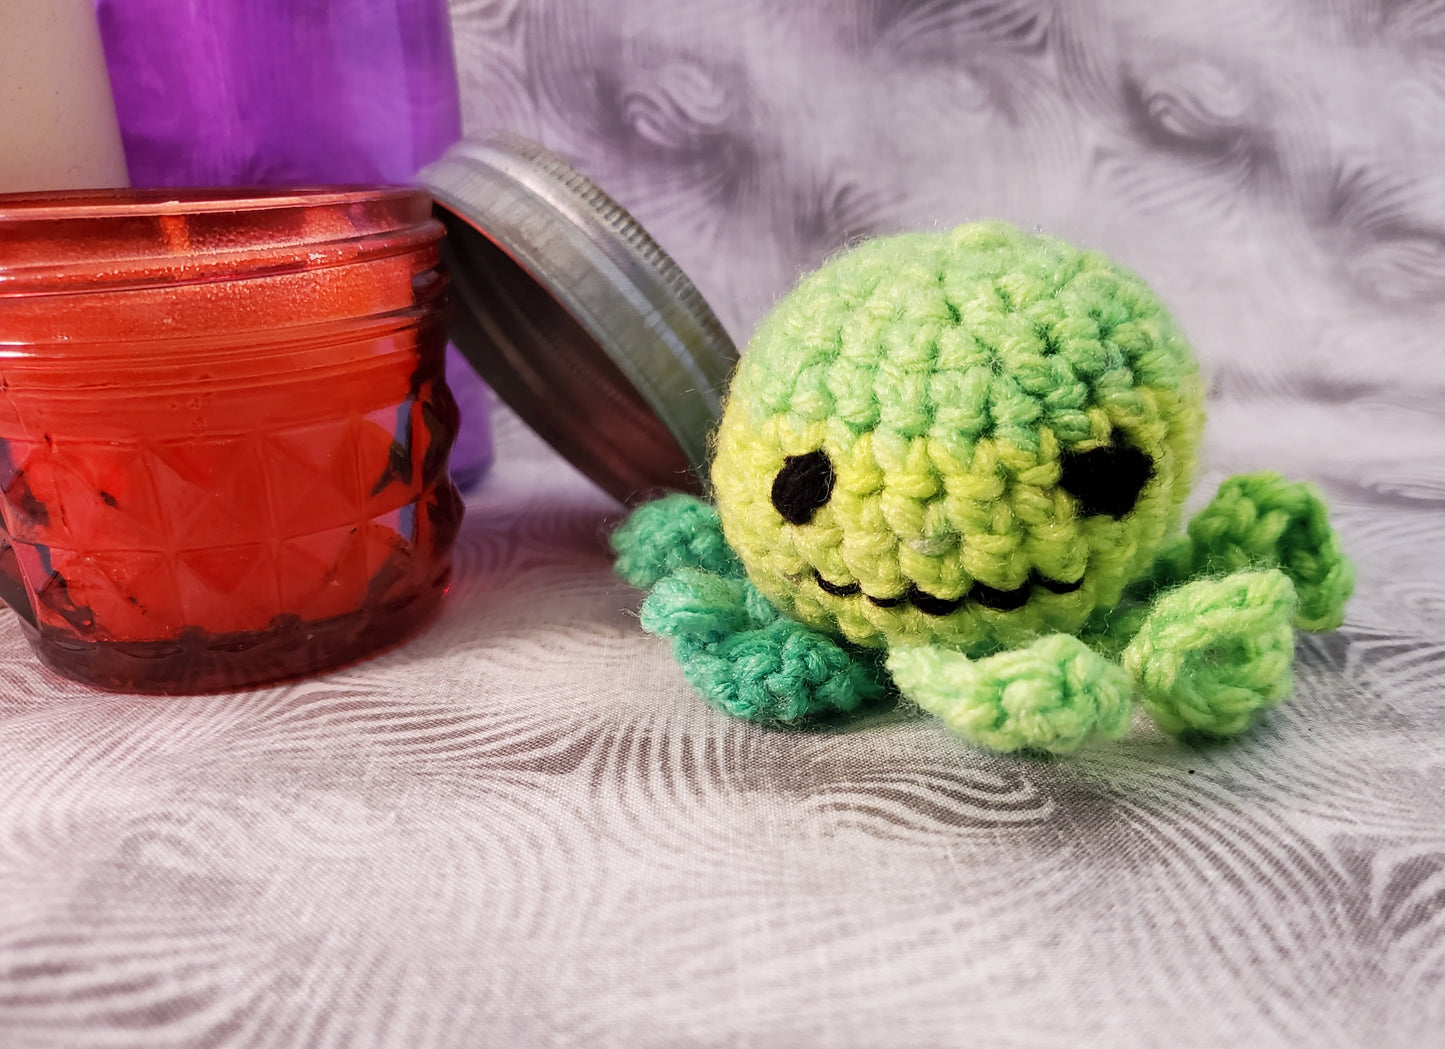 Neon Green and Yellow Ombre Crochet Octopus